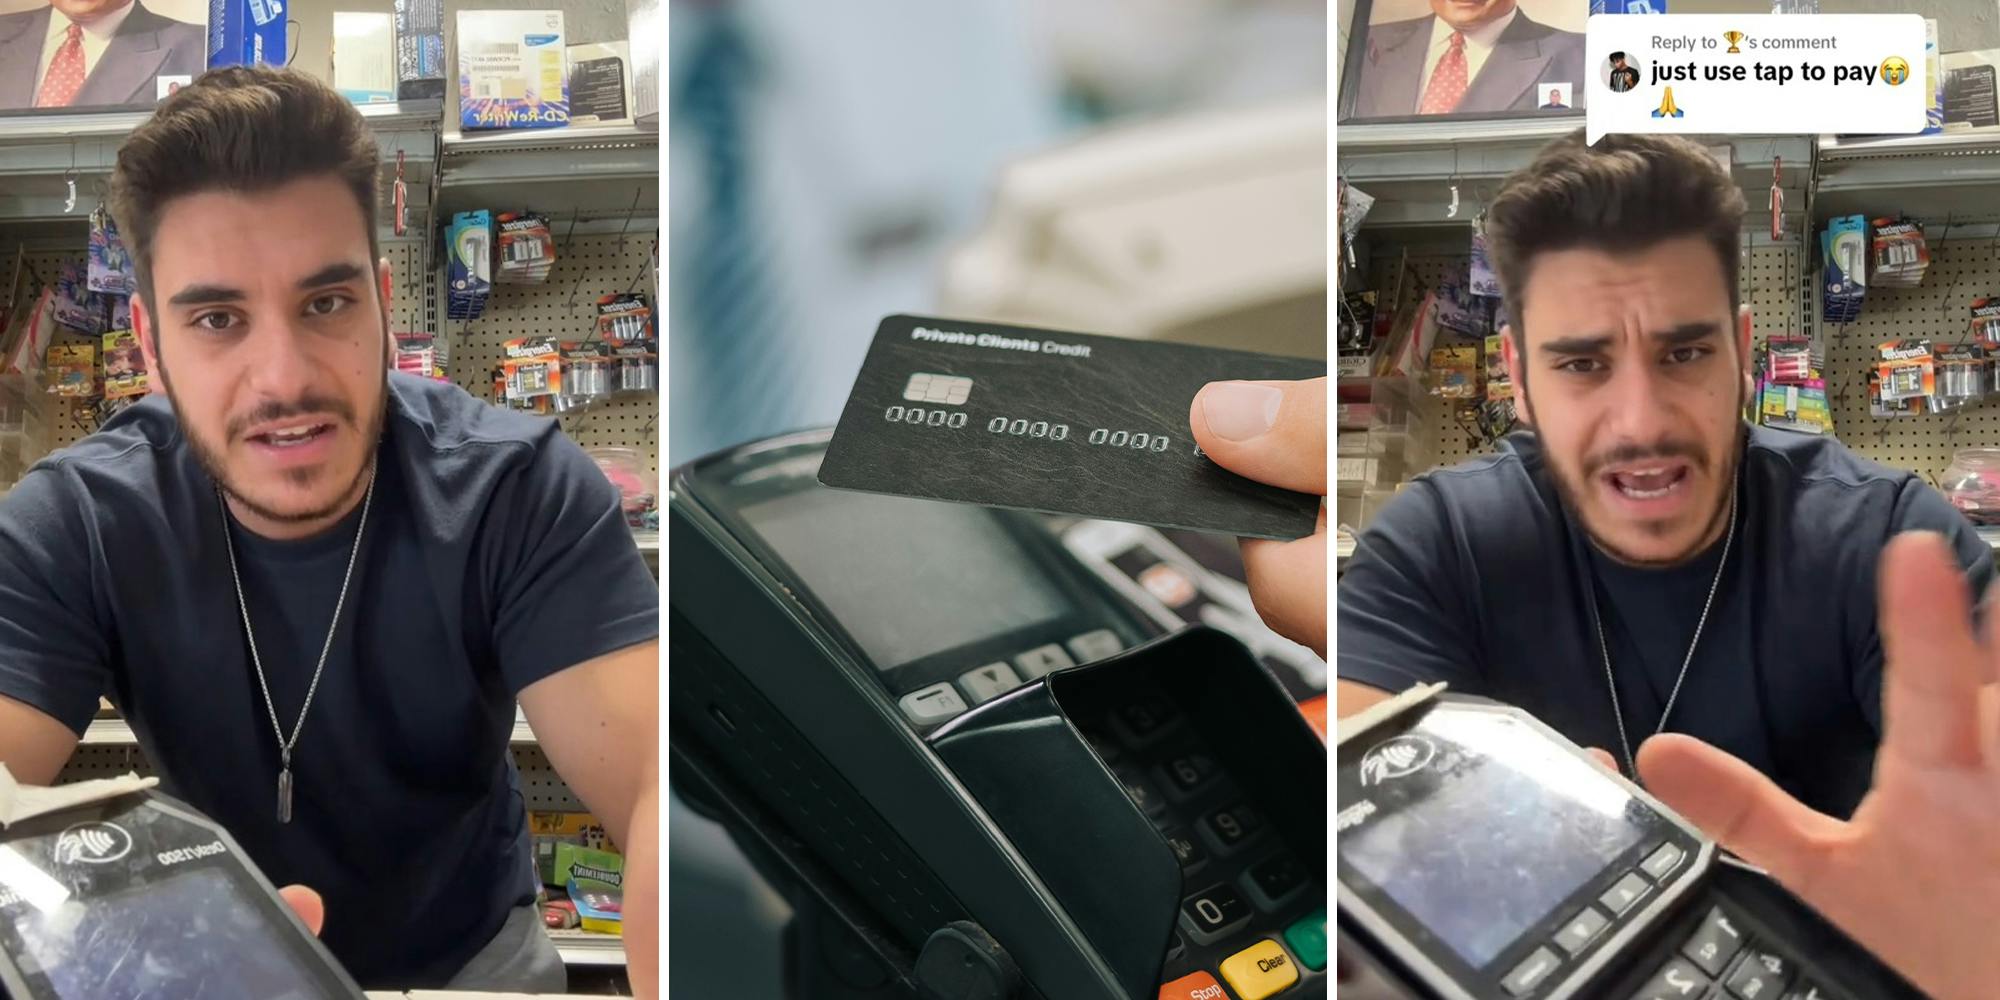 ‘I thought this was common sense’: Retail worker reveals how you’re using ‘tap to pay’ wrong